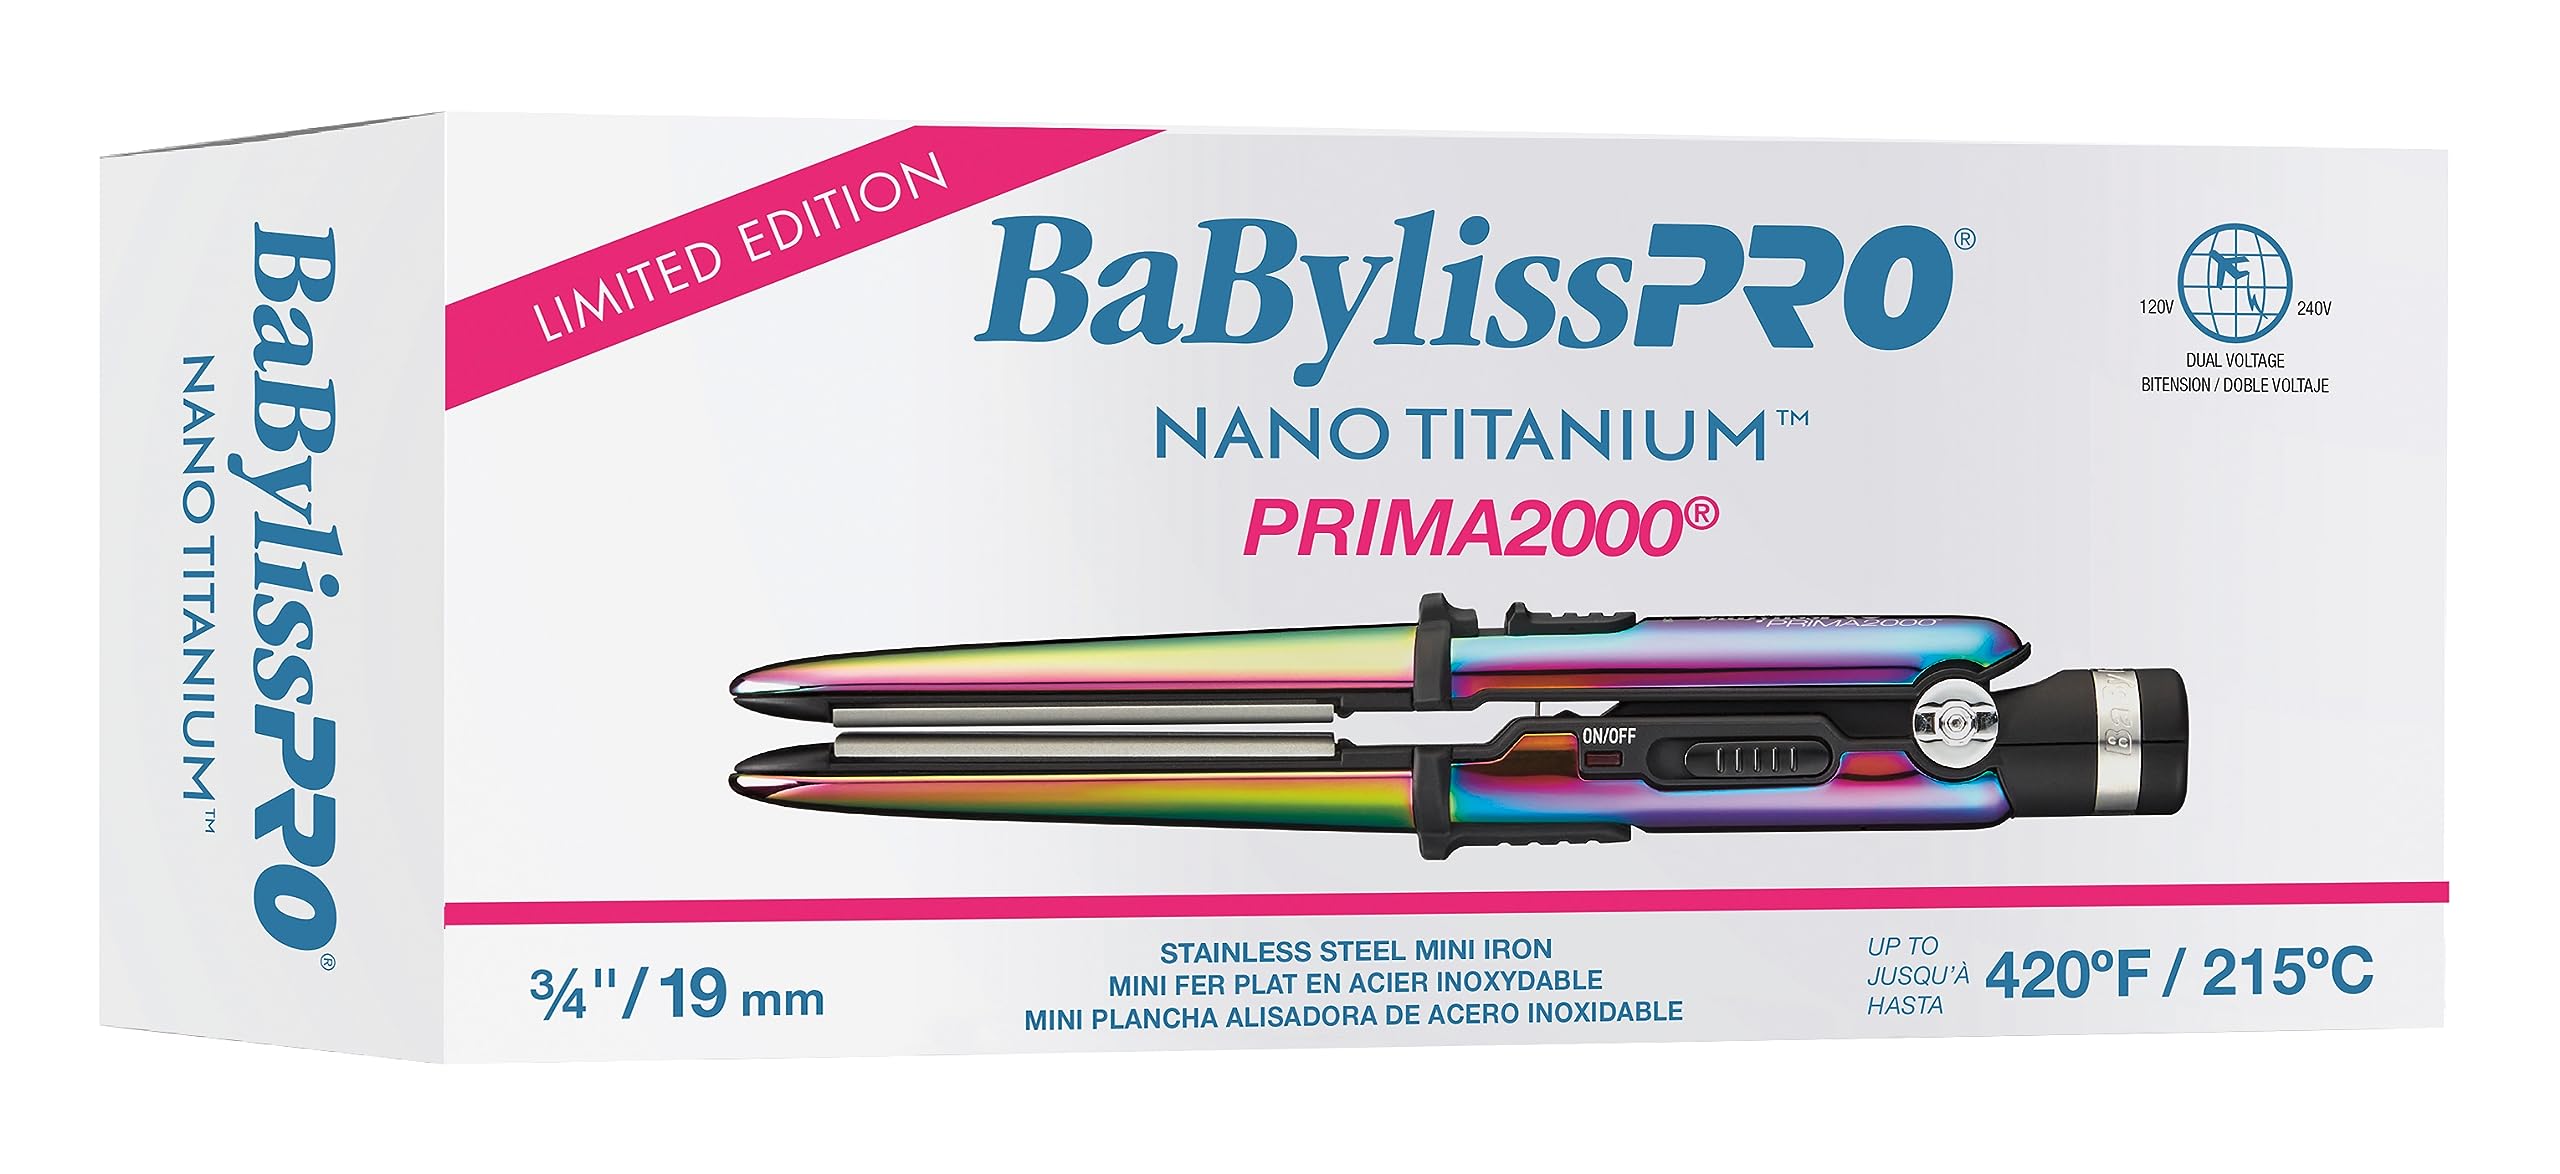 BaBylissPRO Limited Edition Prima2000 - 3/4" / 19mm Stainless Steel Mini Iron